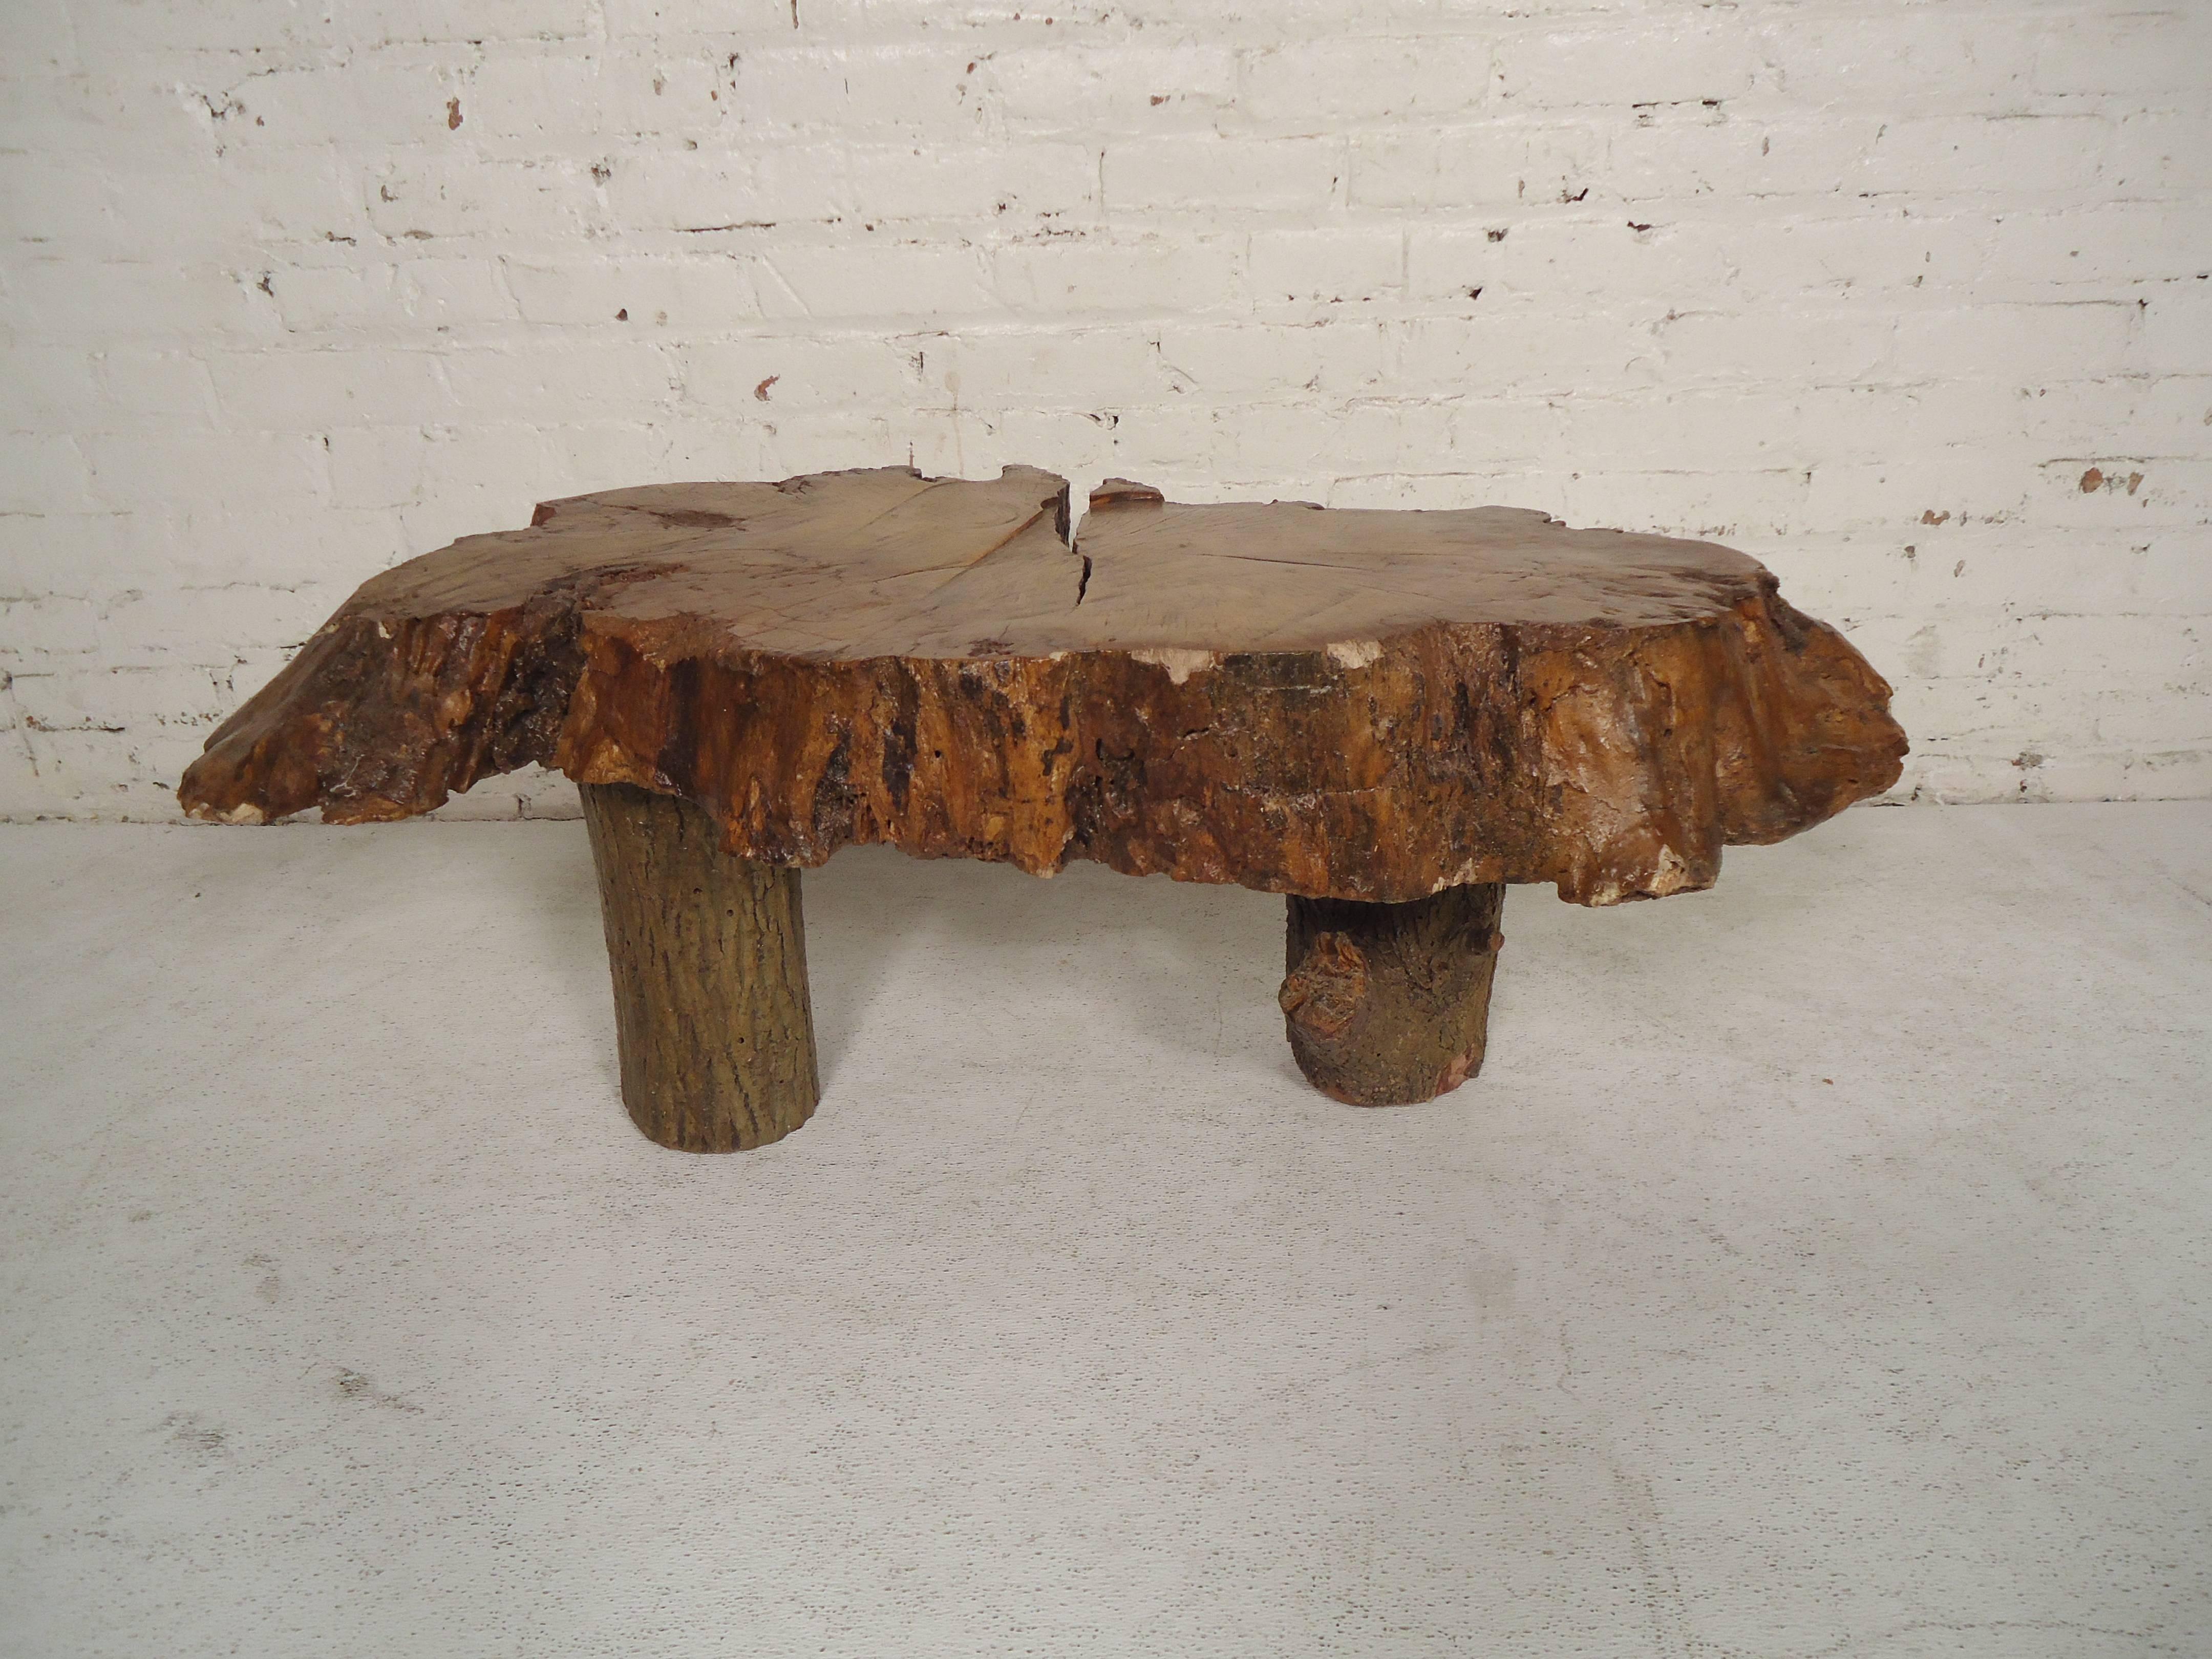 This beautiful vintage modern live edge bench features a unique tree slab top with elegant wood grain. Stylish design with thick wood legs ensuring maximum sturdiness. This stunning live edge table offers a taste of nature within any modern